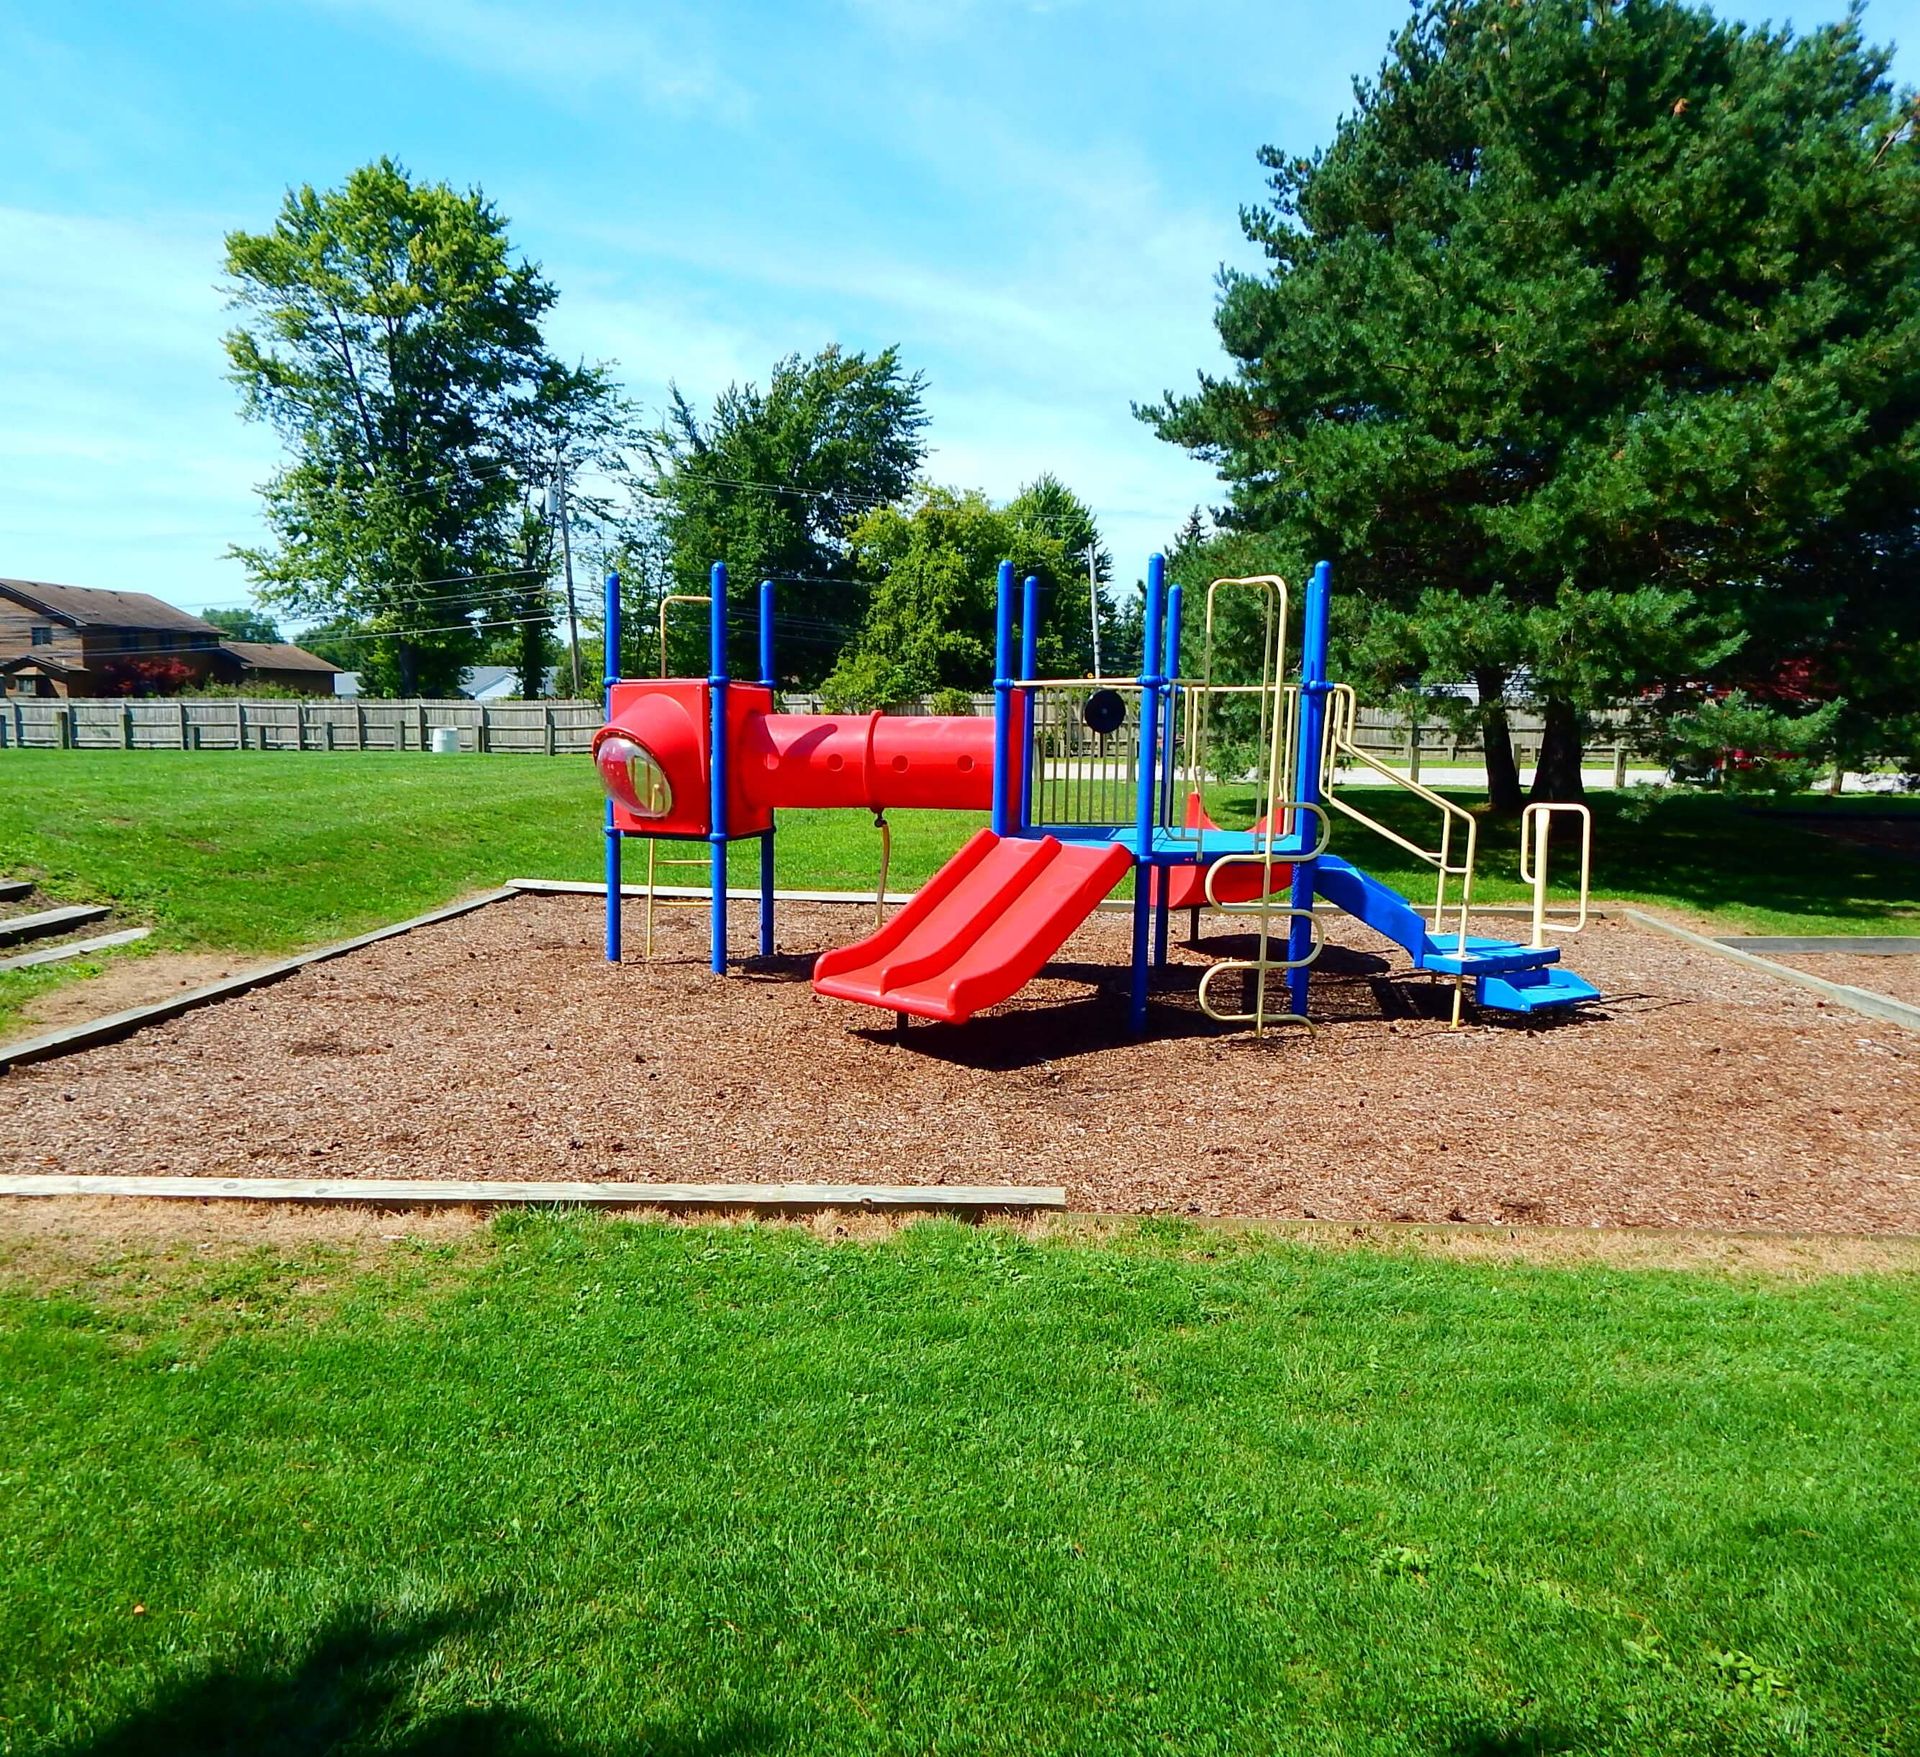 A playground with a red slide and a blue slide.